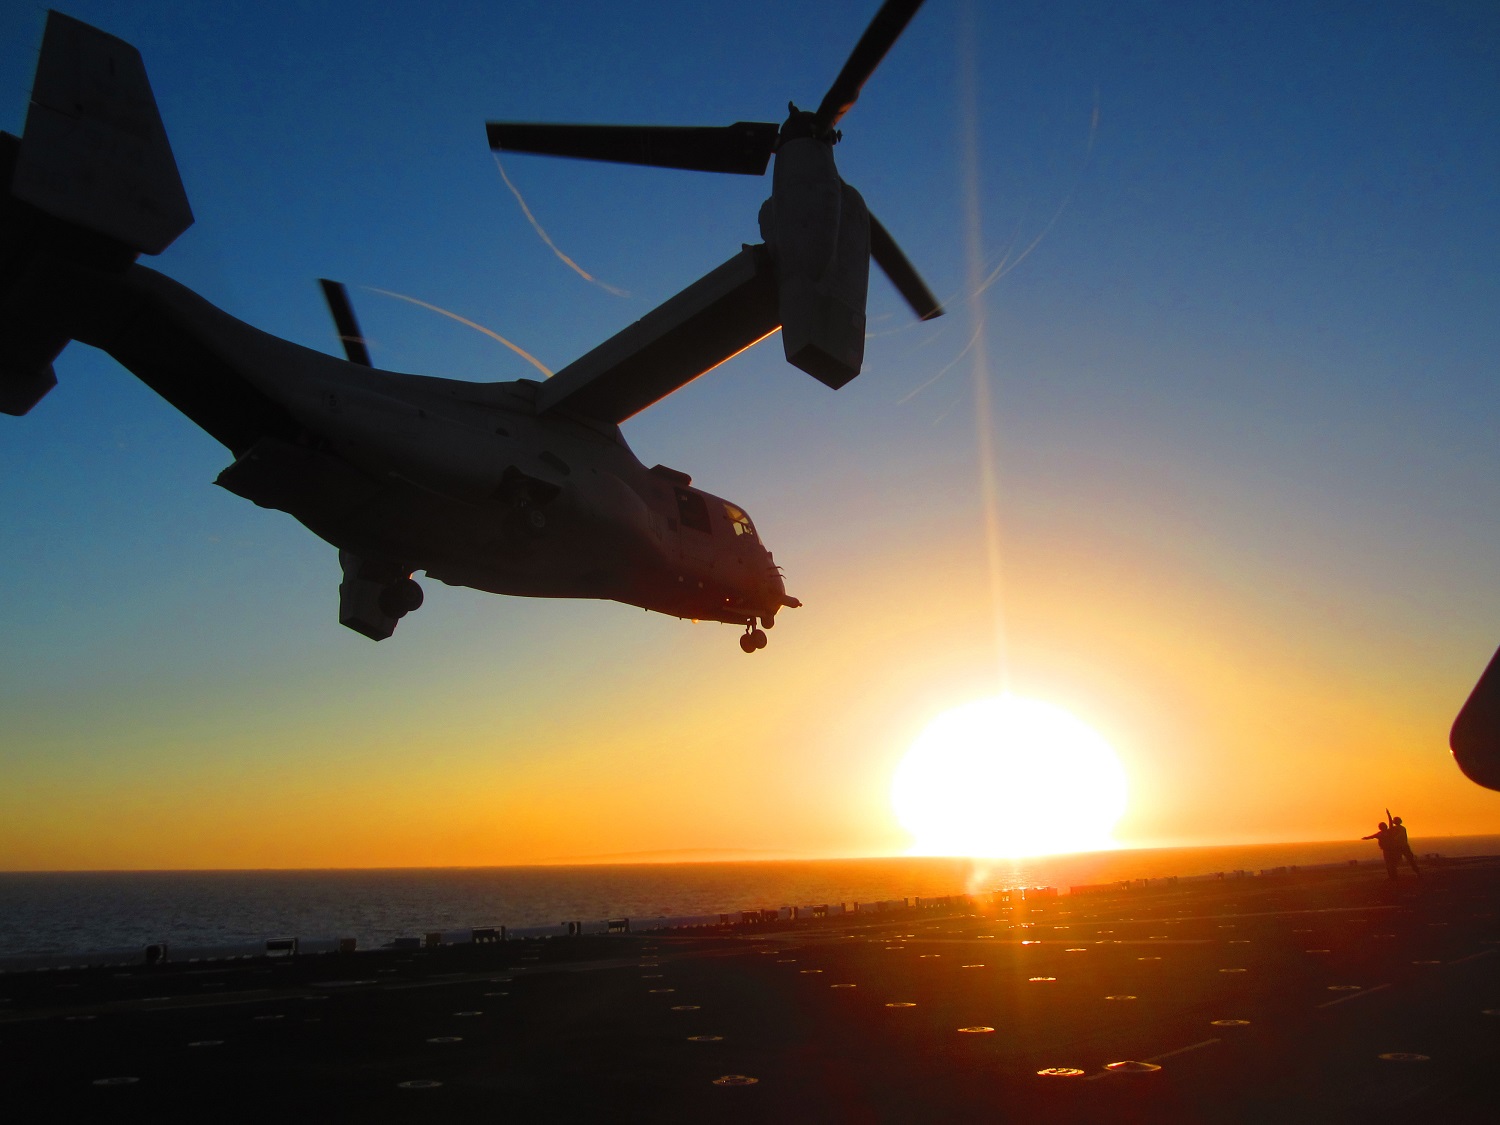 PACIFIC OCEAN (April 27, 2015) An MV-22 Osprey tilt-rotor aircraft from Marine Medium Tiltrotor Squadron (VMM) 163 lands aboard the amphibious assault ship USS America (LHA 6) during deck landing qualifications. America is the first ship of its class and optimized for Marine Corps aviation.  U.S. Marine Corps photo by Chief Warrant Officer 4 Shane Duhe 